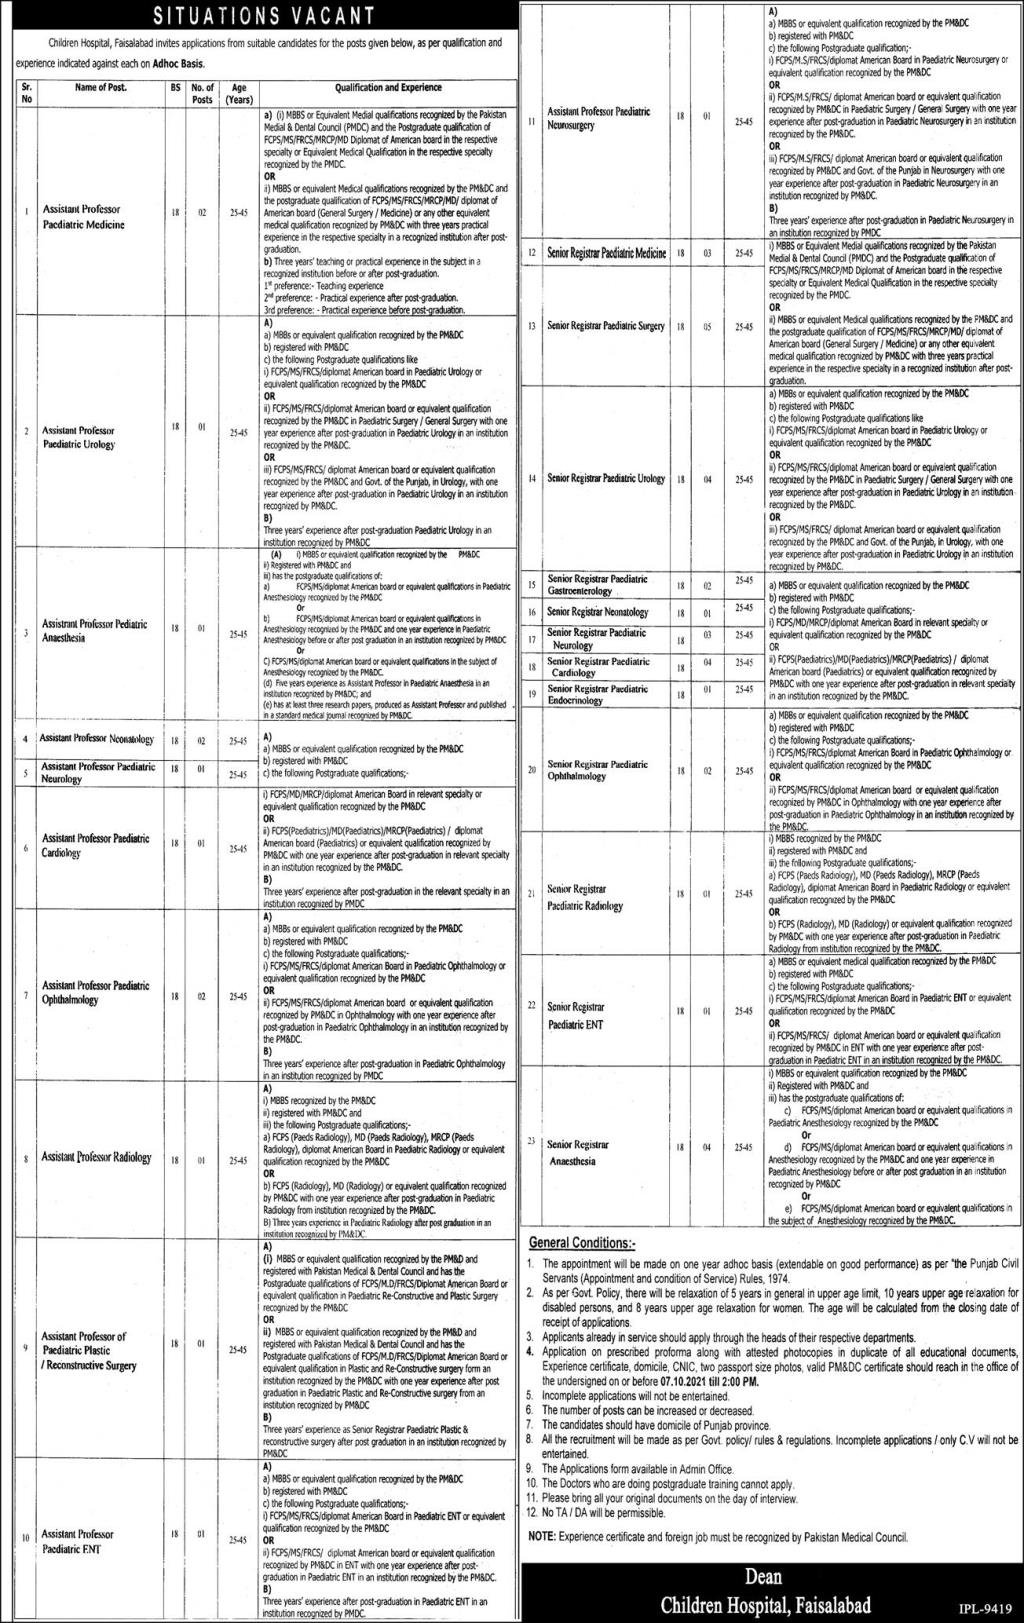 Government Jobs in Faisalabad Today 2021 At Faisalabad Children Hospital